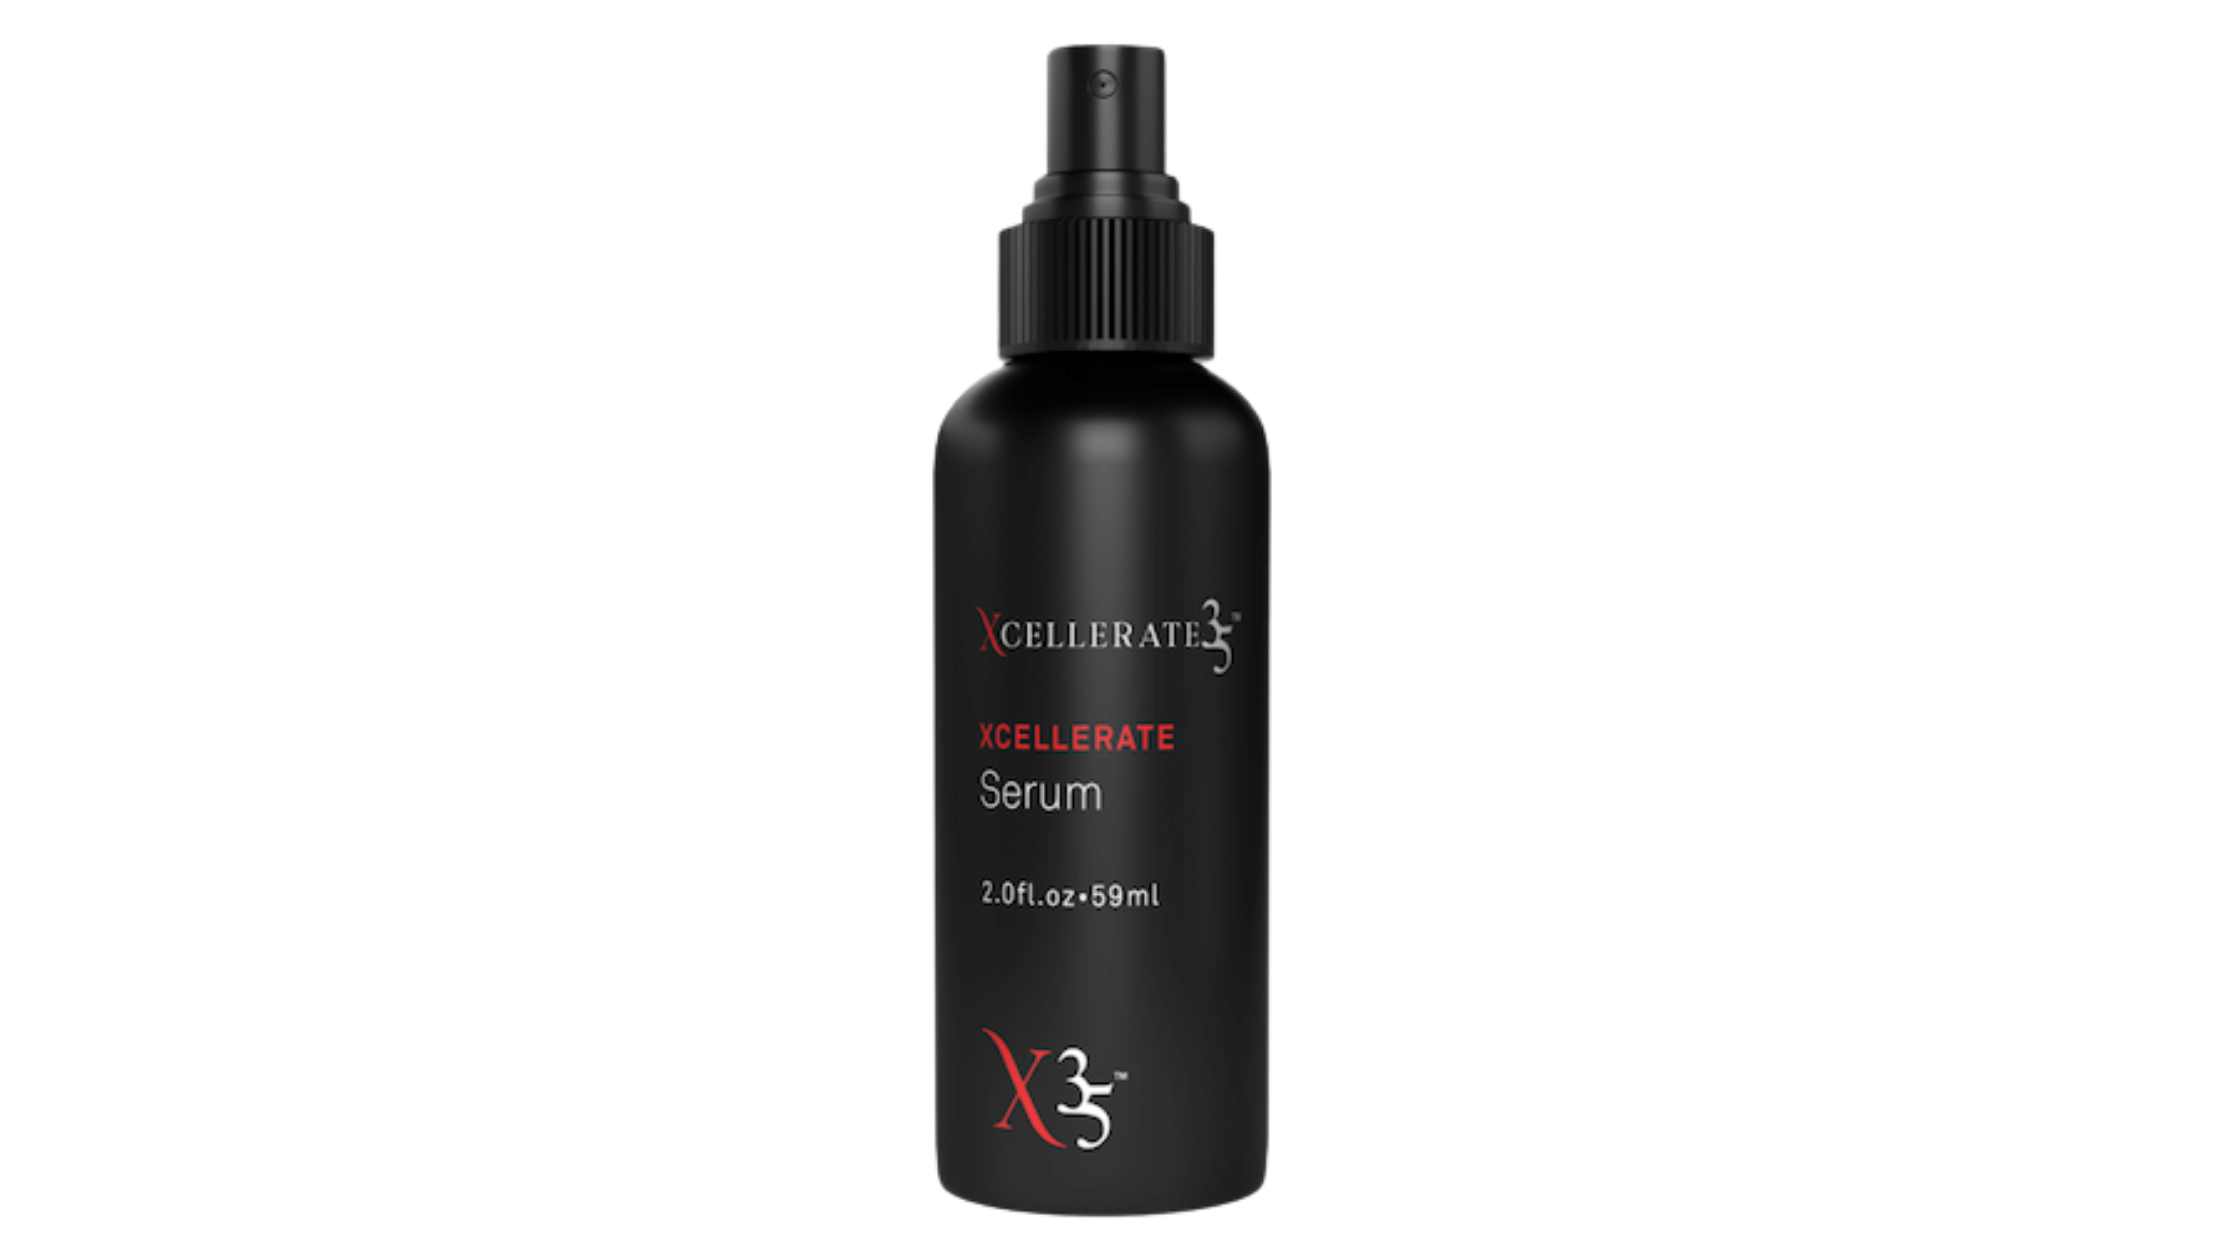 Xcellerate 35 Reviews